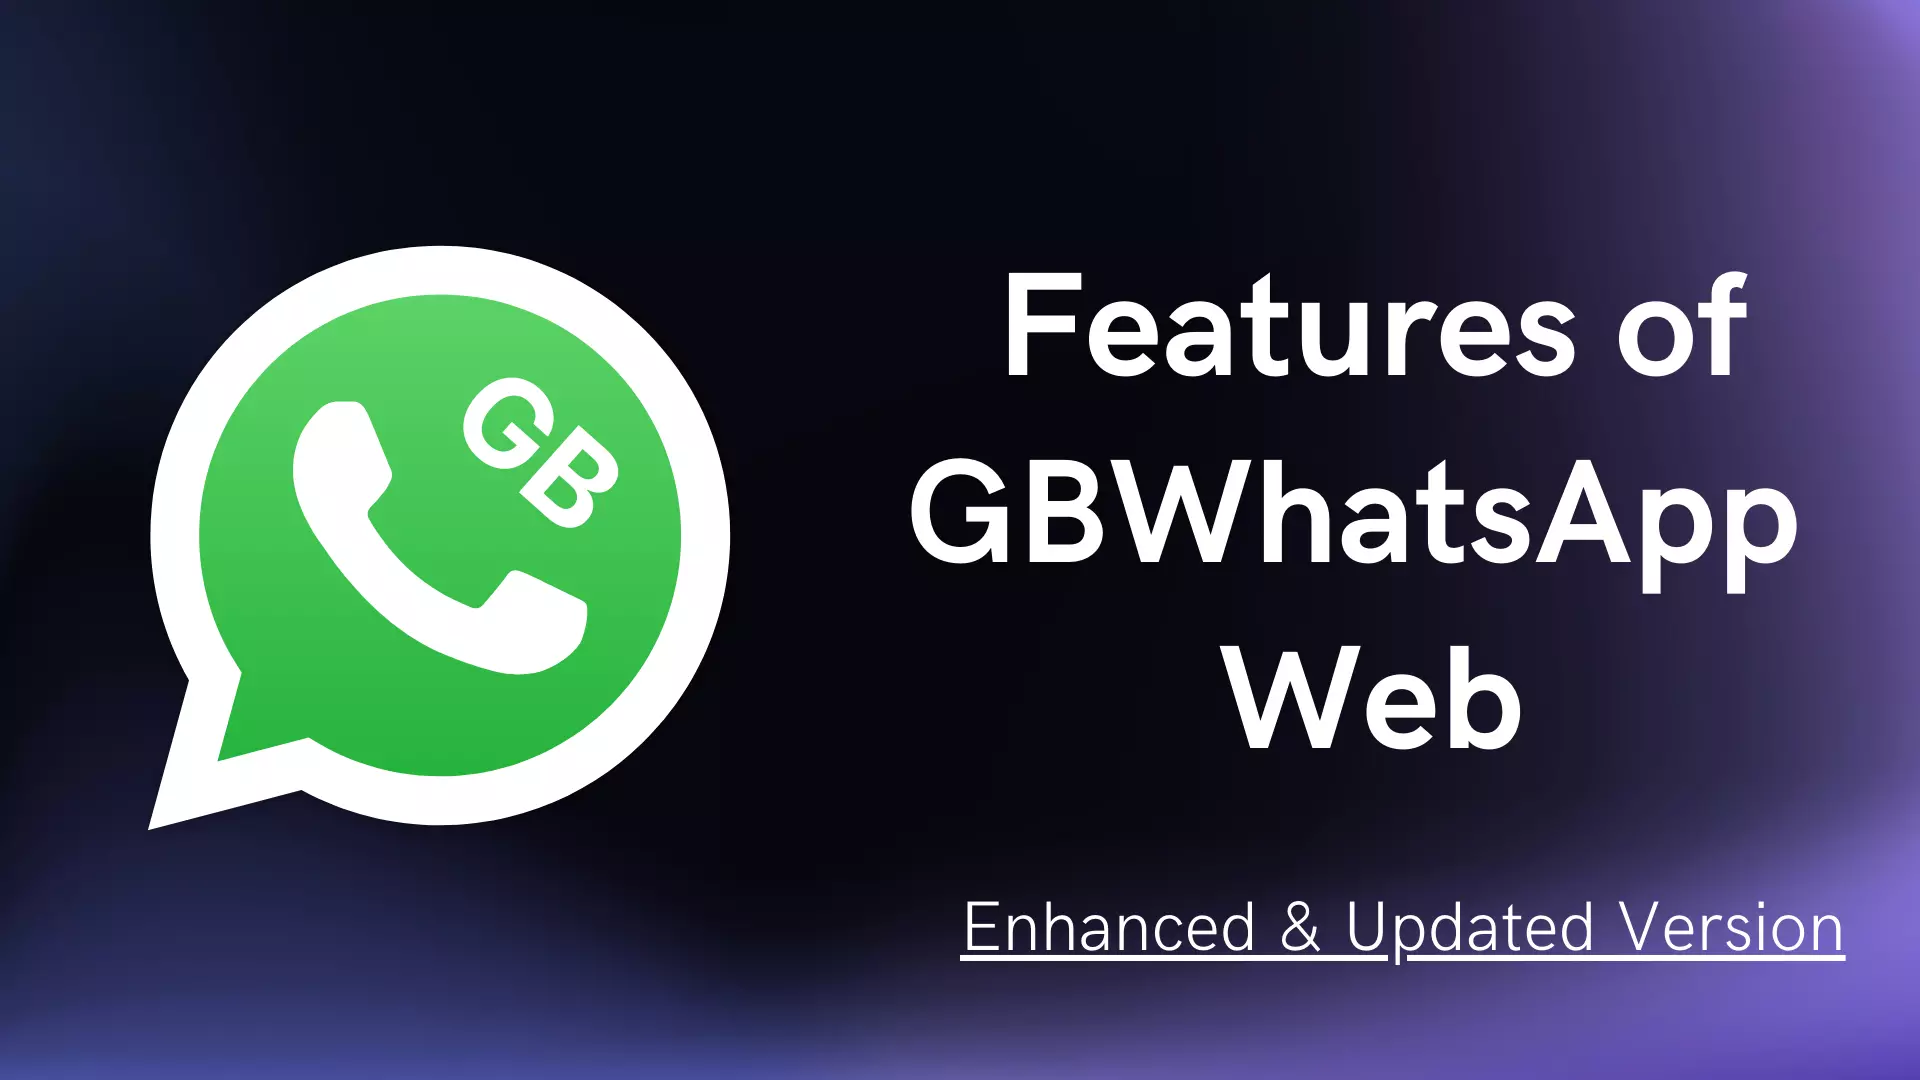 Features of GBWhatsApp Web